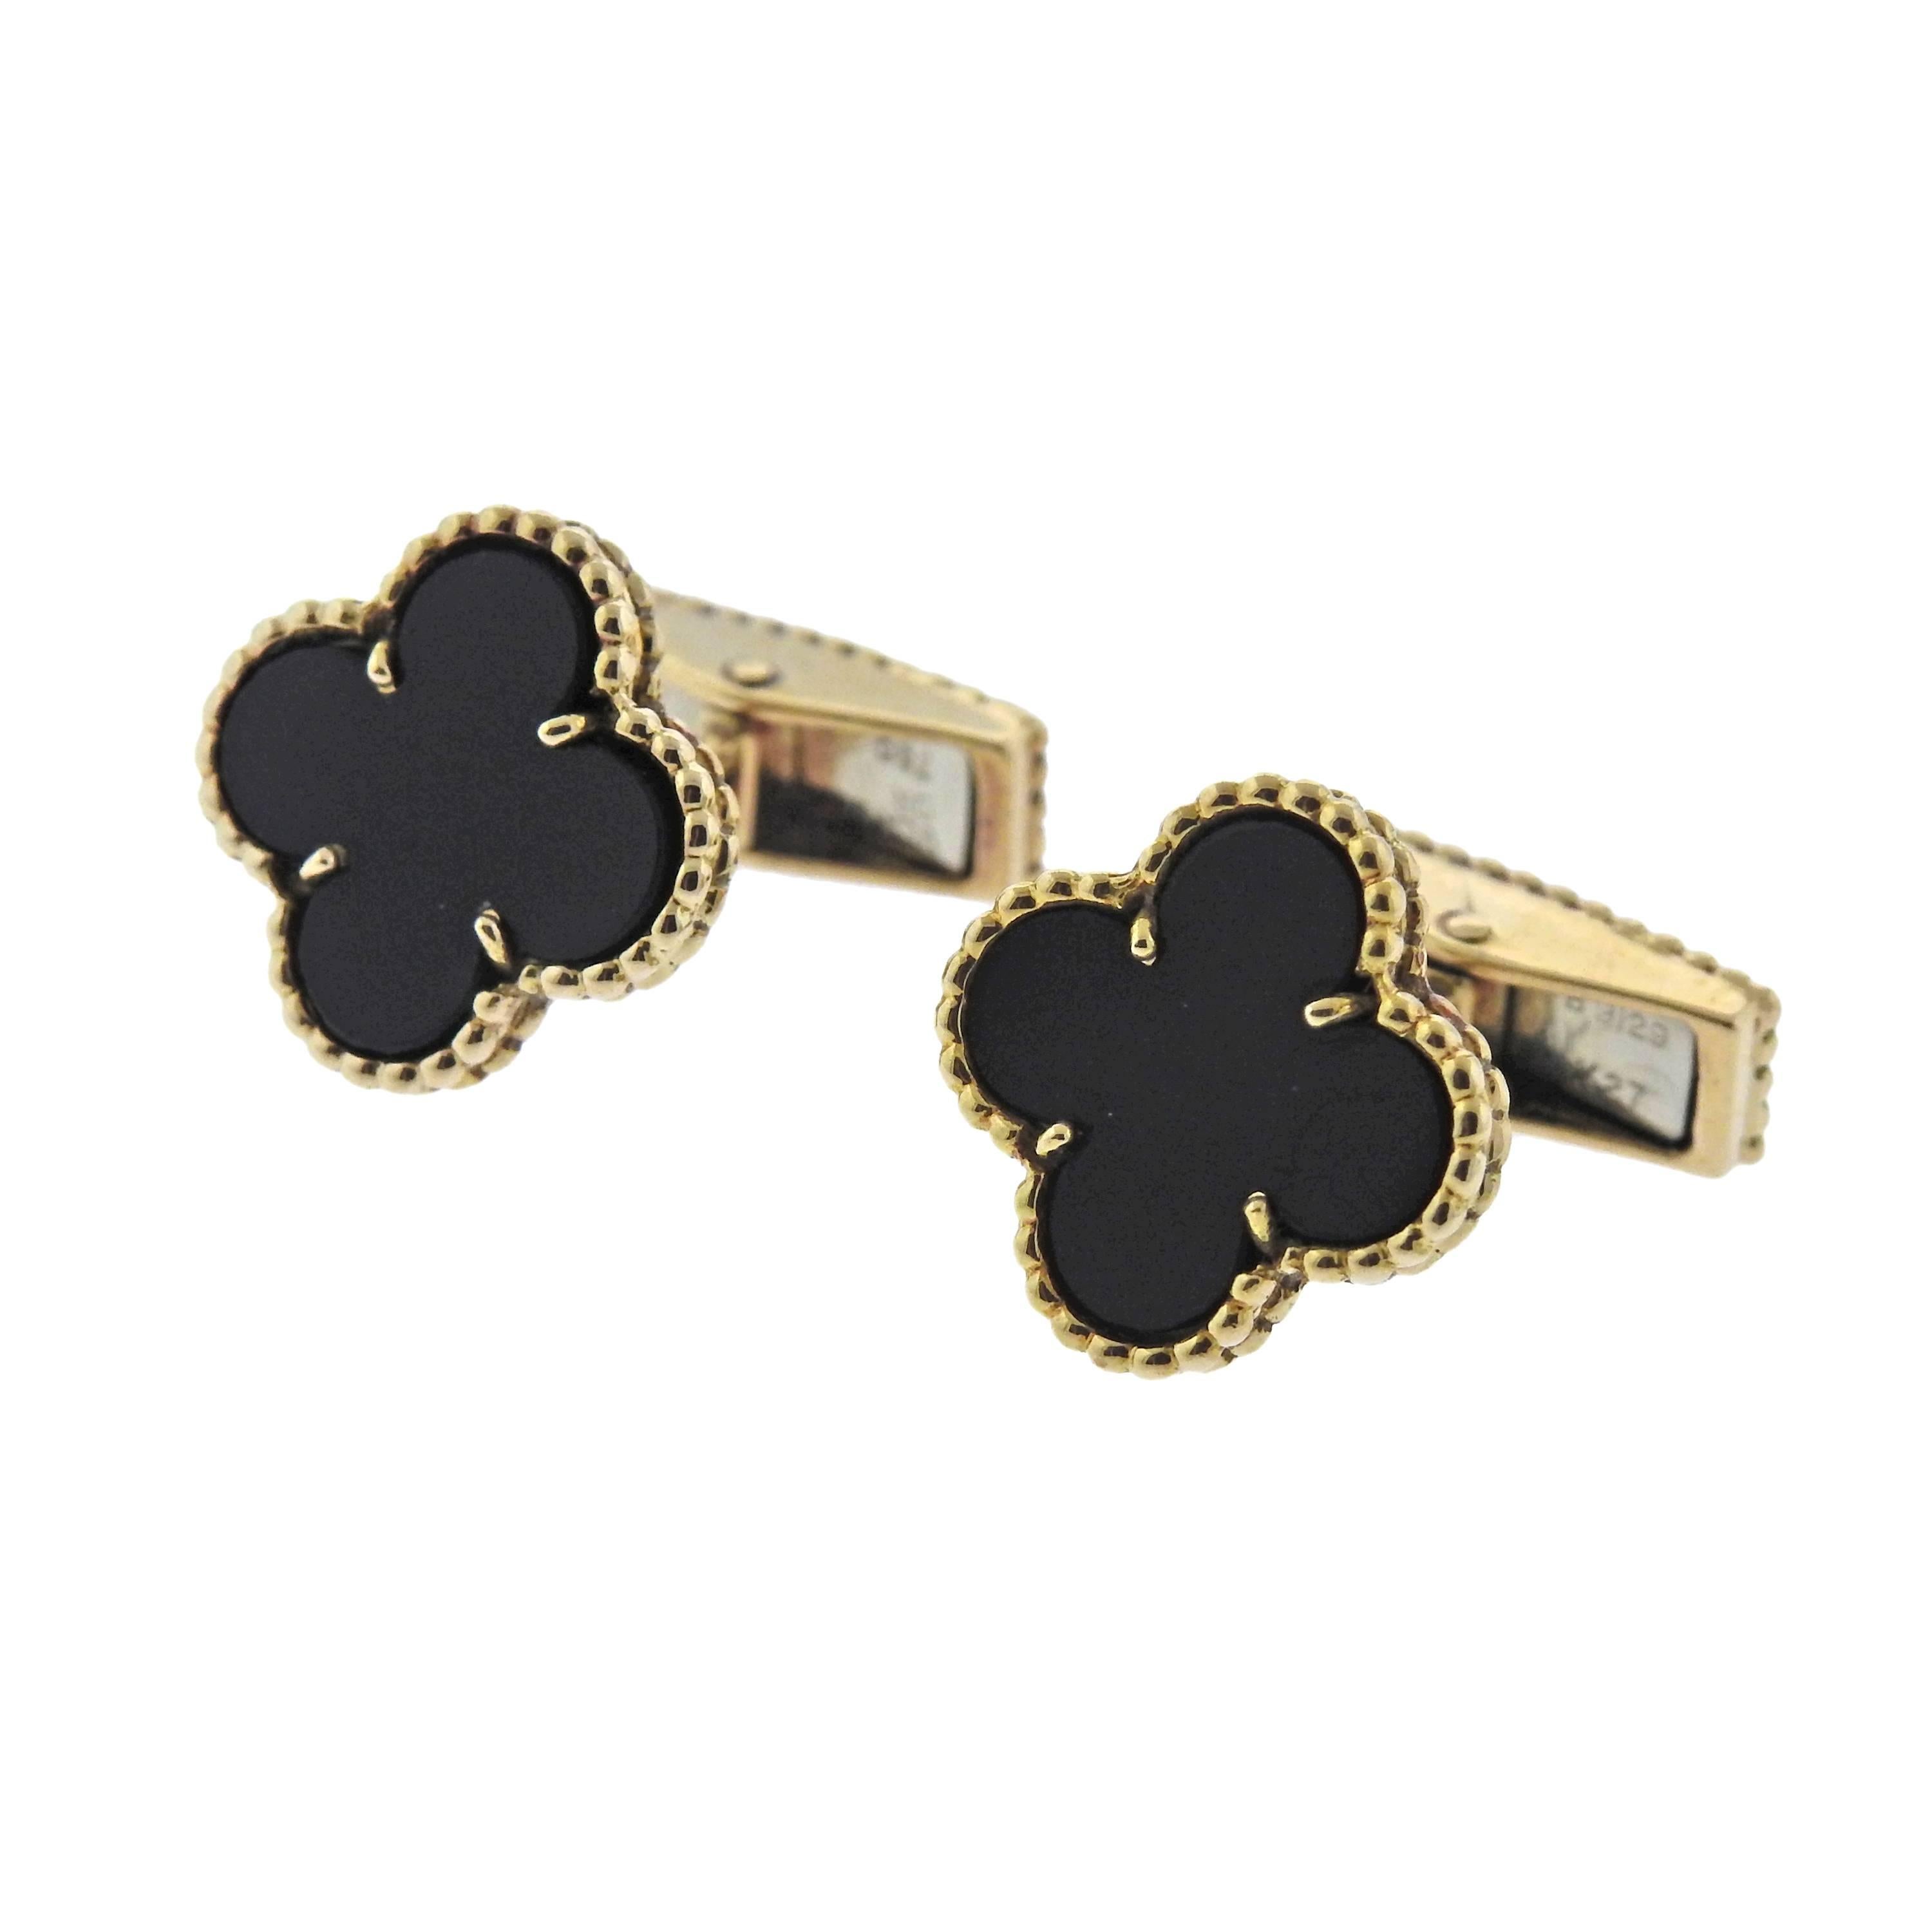 Pair of iconic Alhambra 18k gold cufflinks, crafted by Van Cleef & Arpels, set with black onyx.  Each top is 13.7mm x 14.7mm. Weight - 9.2 grams. Marked: VCA hallmark, French eagle marks, VCA or 750, B9129***.